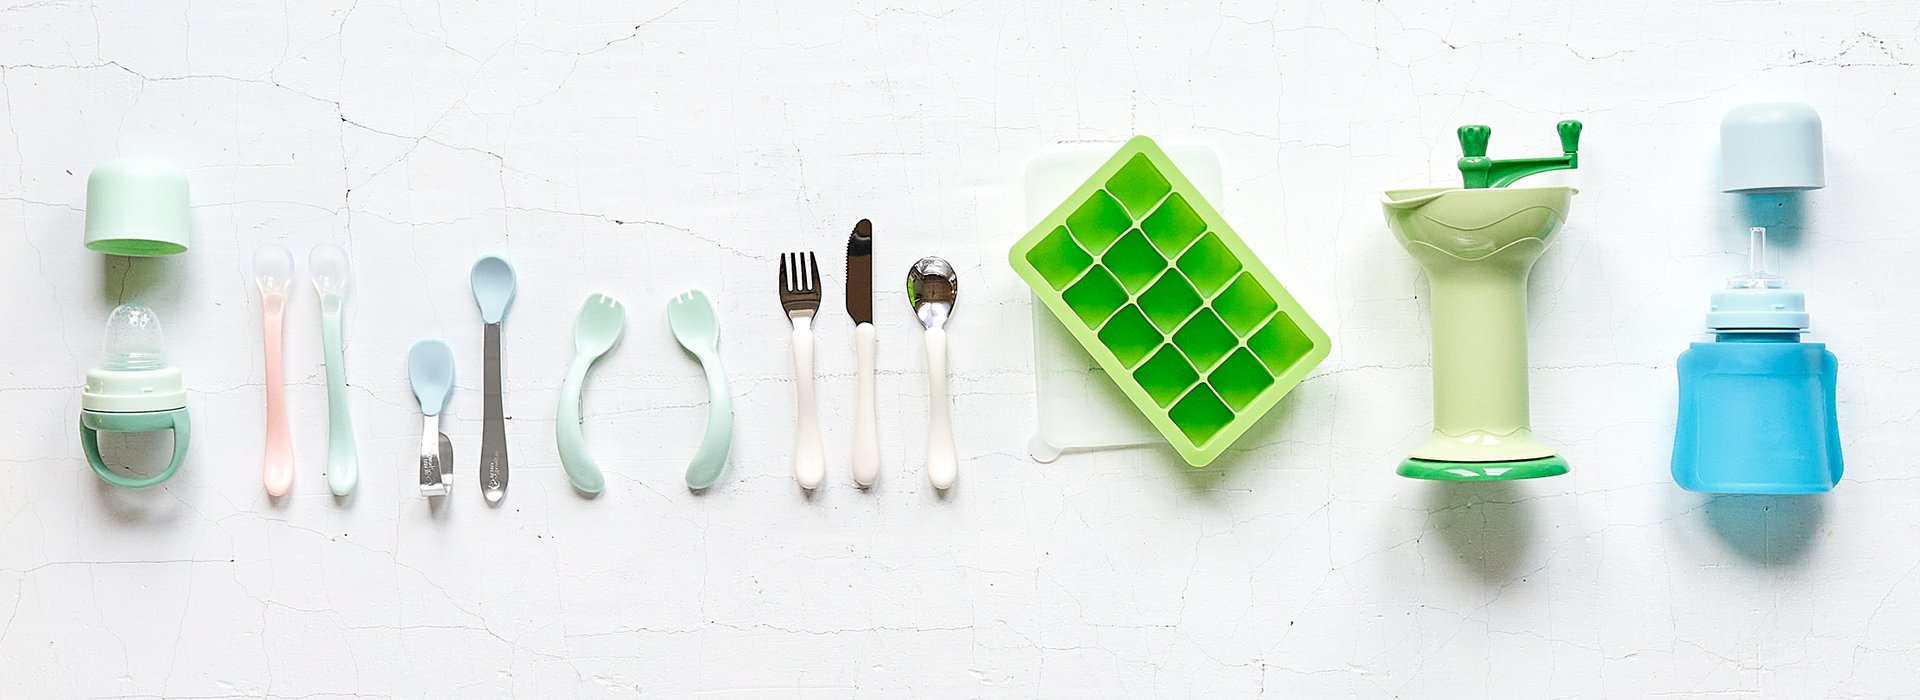 dishes, cutlery, non-toxic, plant-plastic, safe